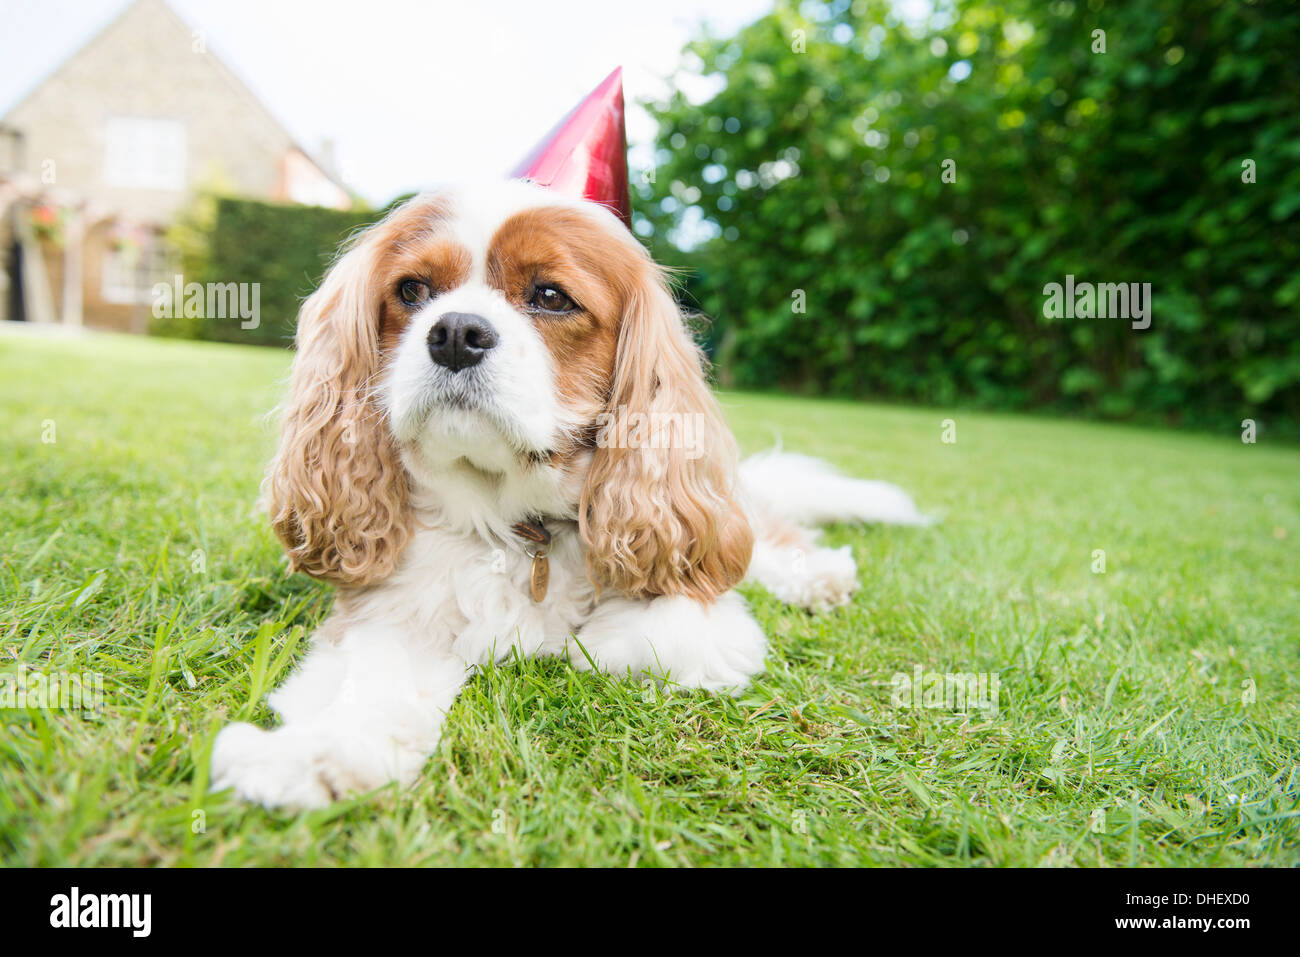 Dog wearing party hat lying on grass Banque D'Images